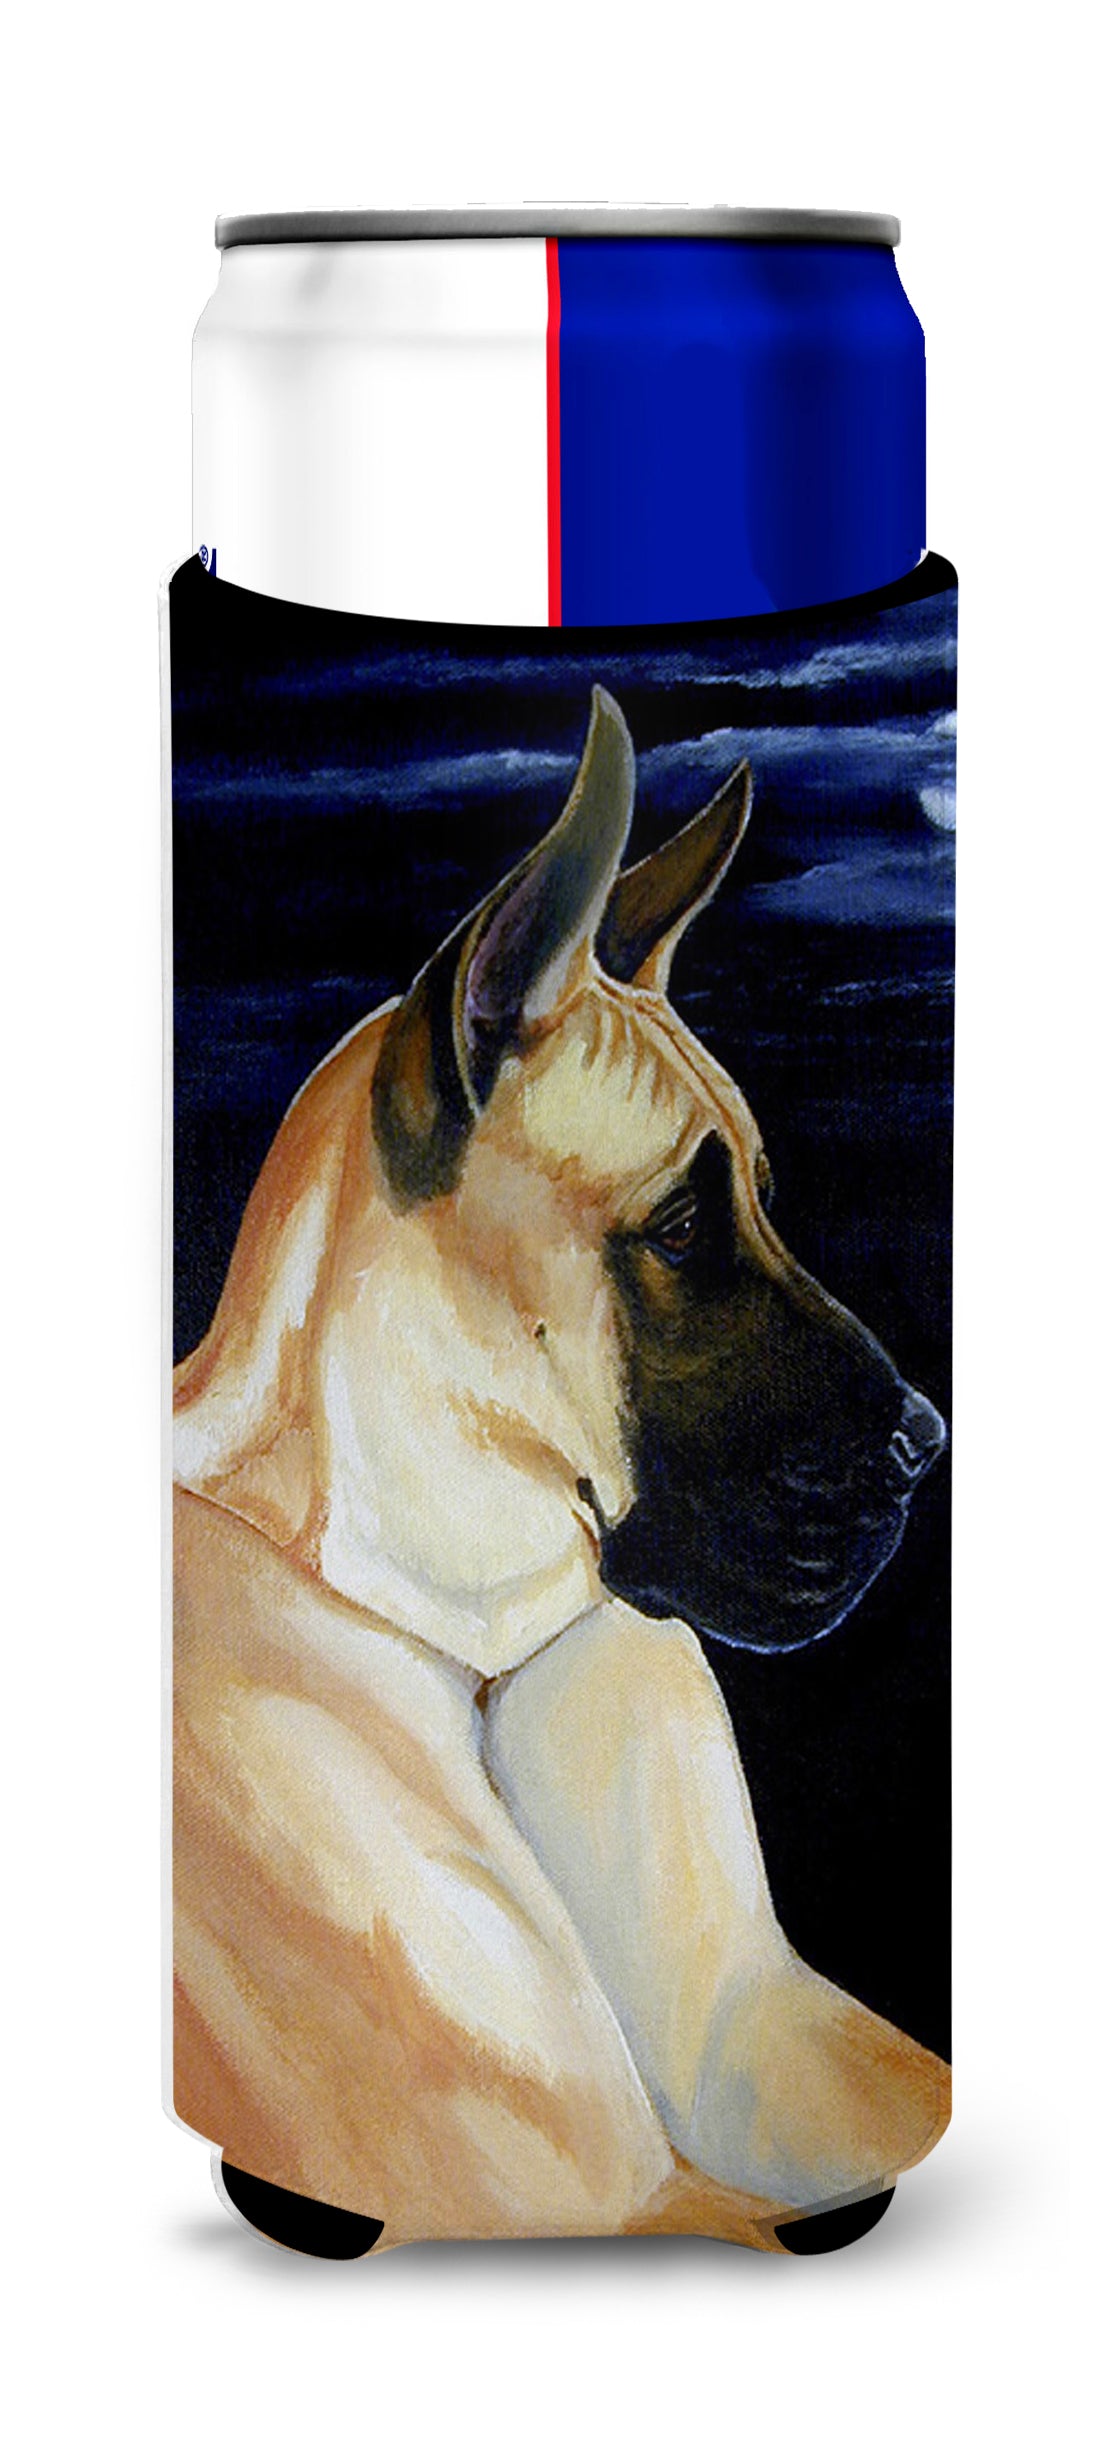 Fawn Great Dane in the Moonlight Ultra Beverage Insulators for slim cans 7059MUK